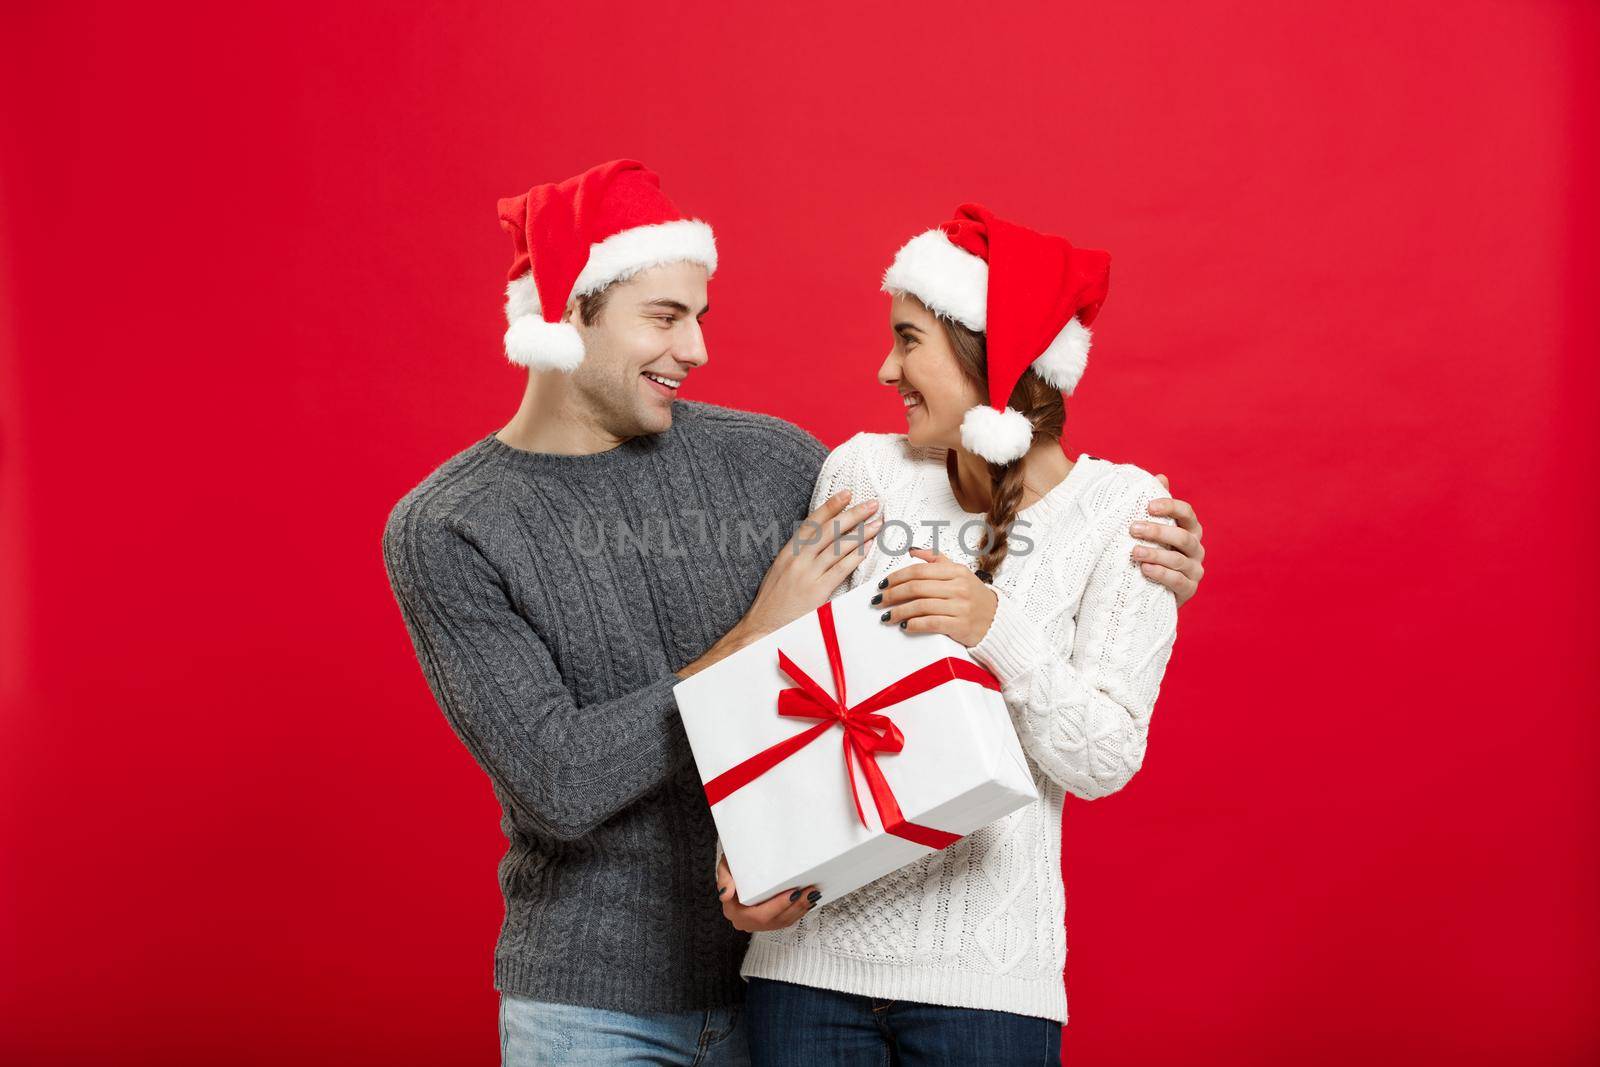 Christmas Concept - Young woman covering man's eyes with hand and giving surprise big gift. Isolated on Red background.